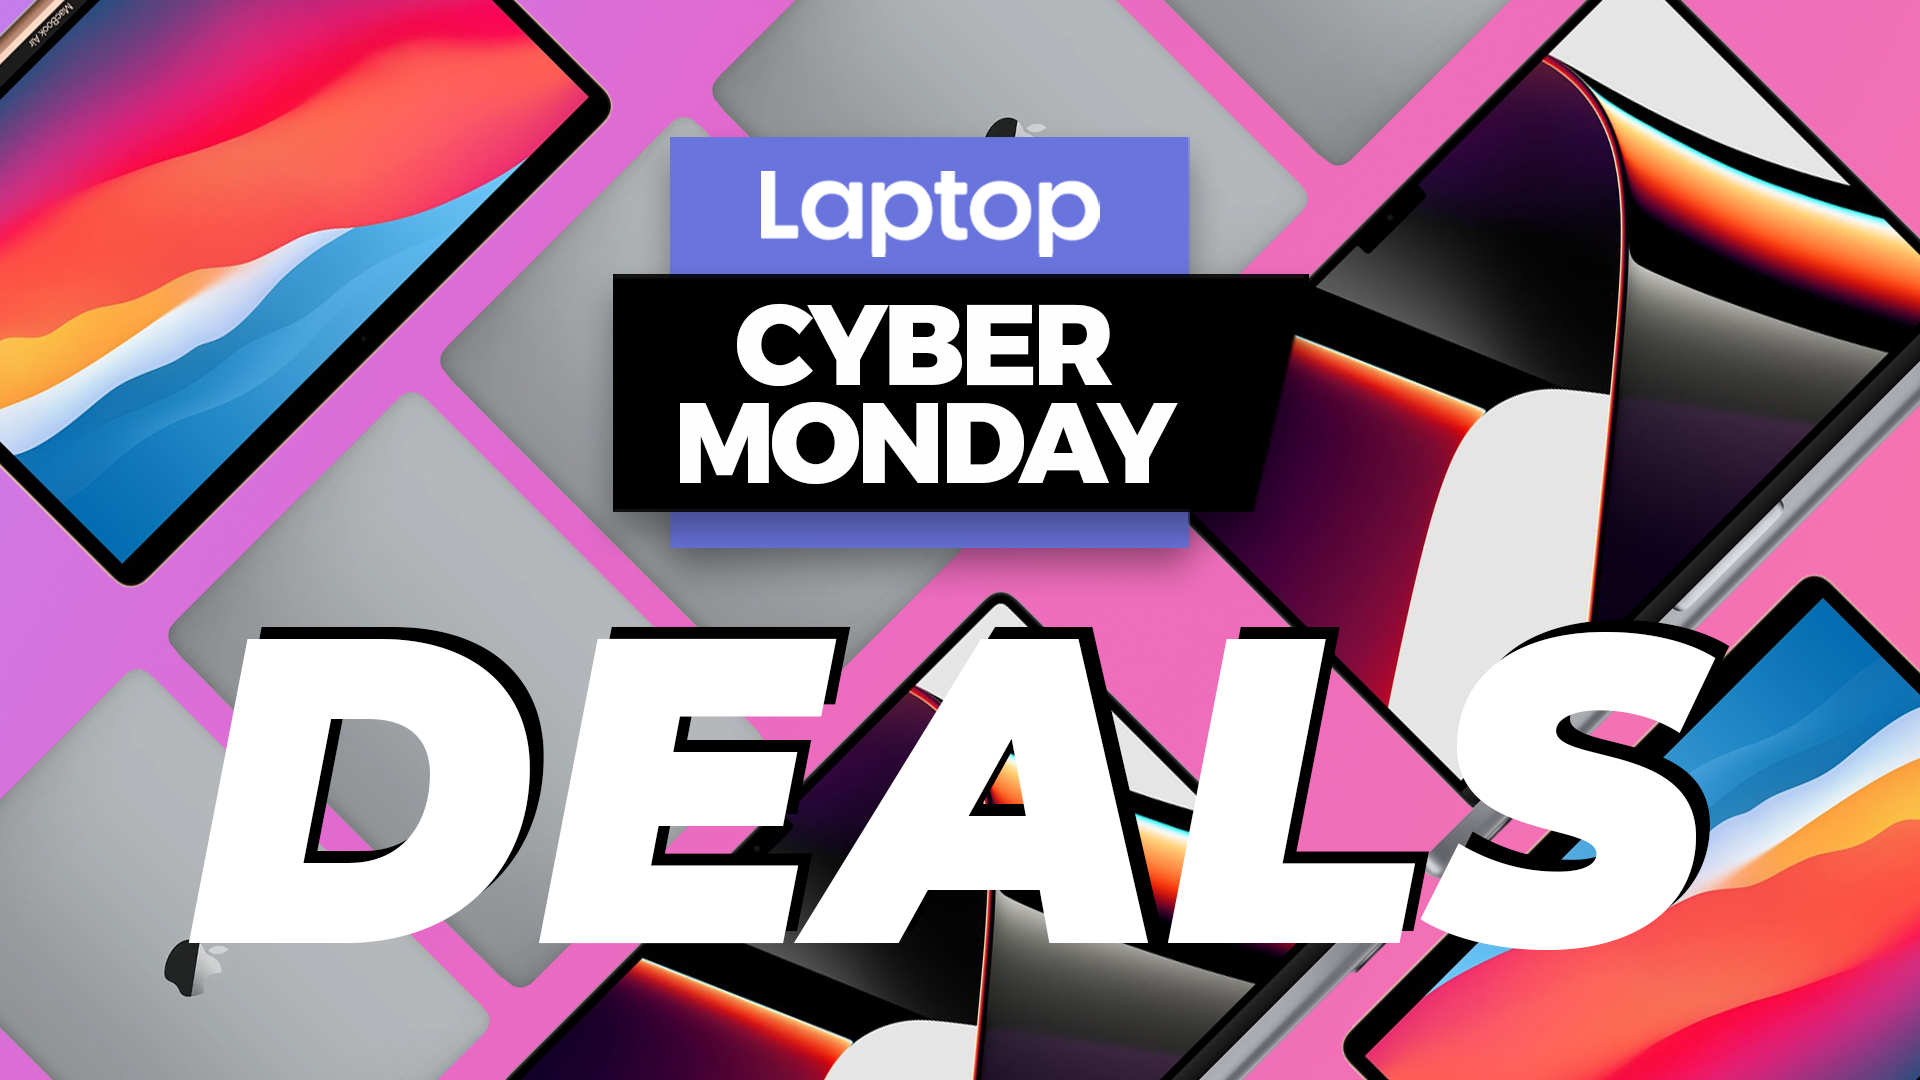 These 46 Last-Minute Cyber Monday Deals Under $50 Make Great Gifts - CNET